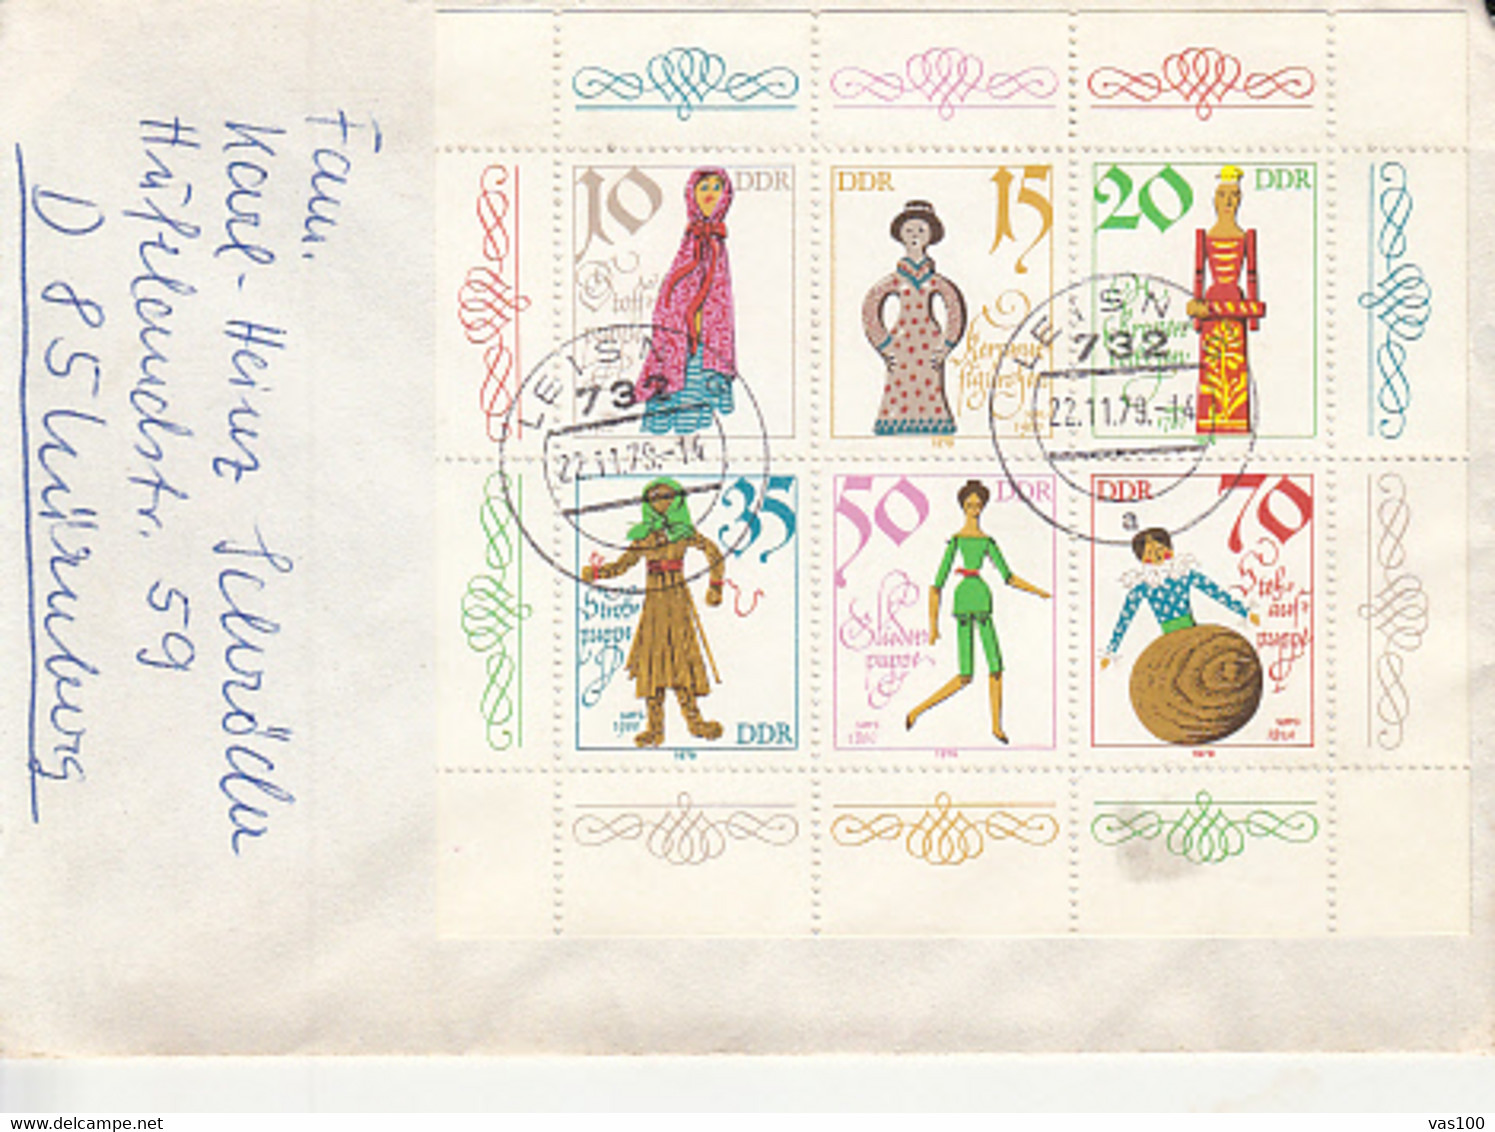 CHILDRENS, PUPPETS, STAMPS ON COVER, 1979, GERMANY - Marionnetten